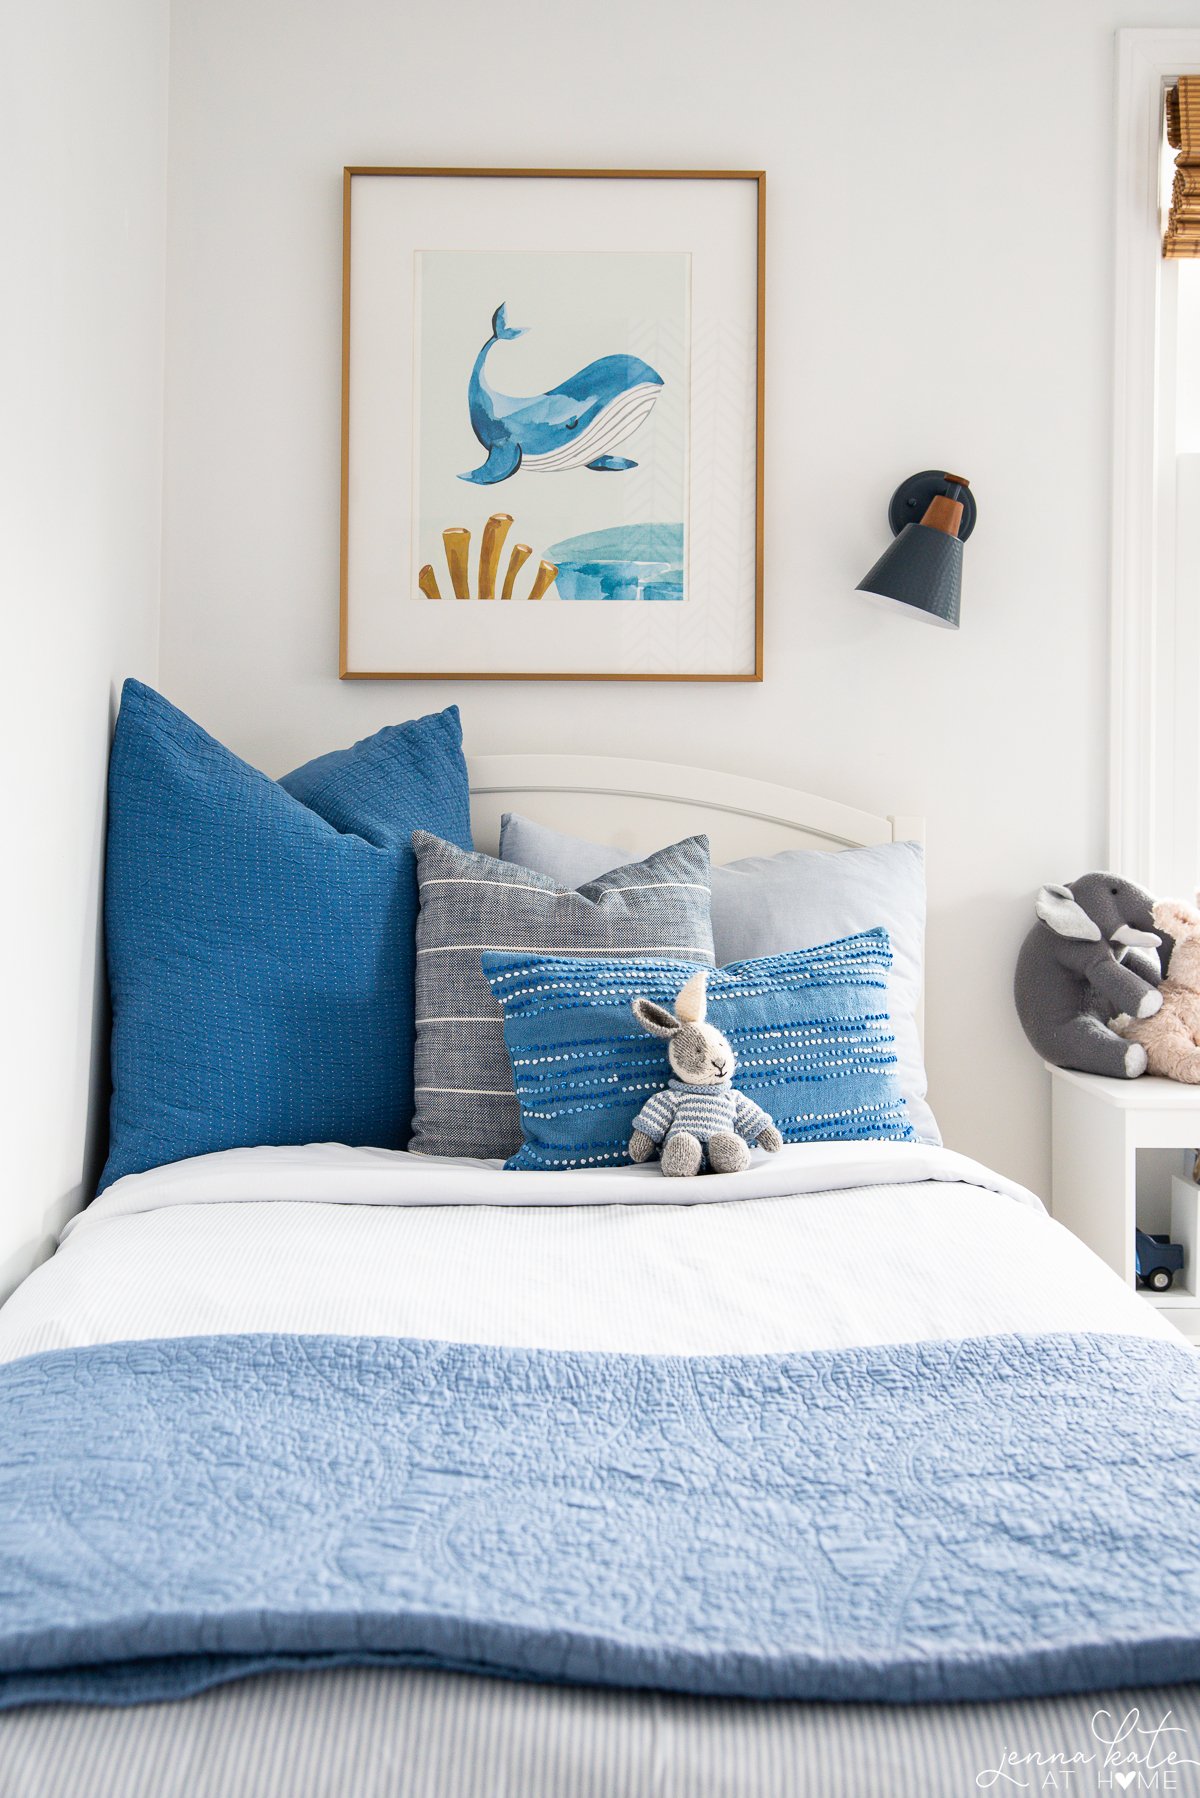 whale artwork hanging over a twin bed